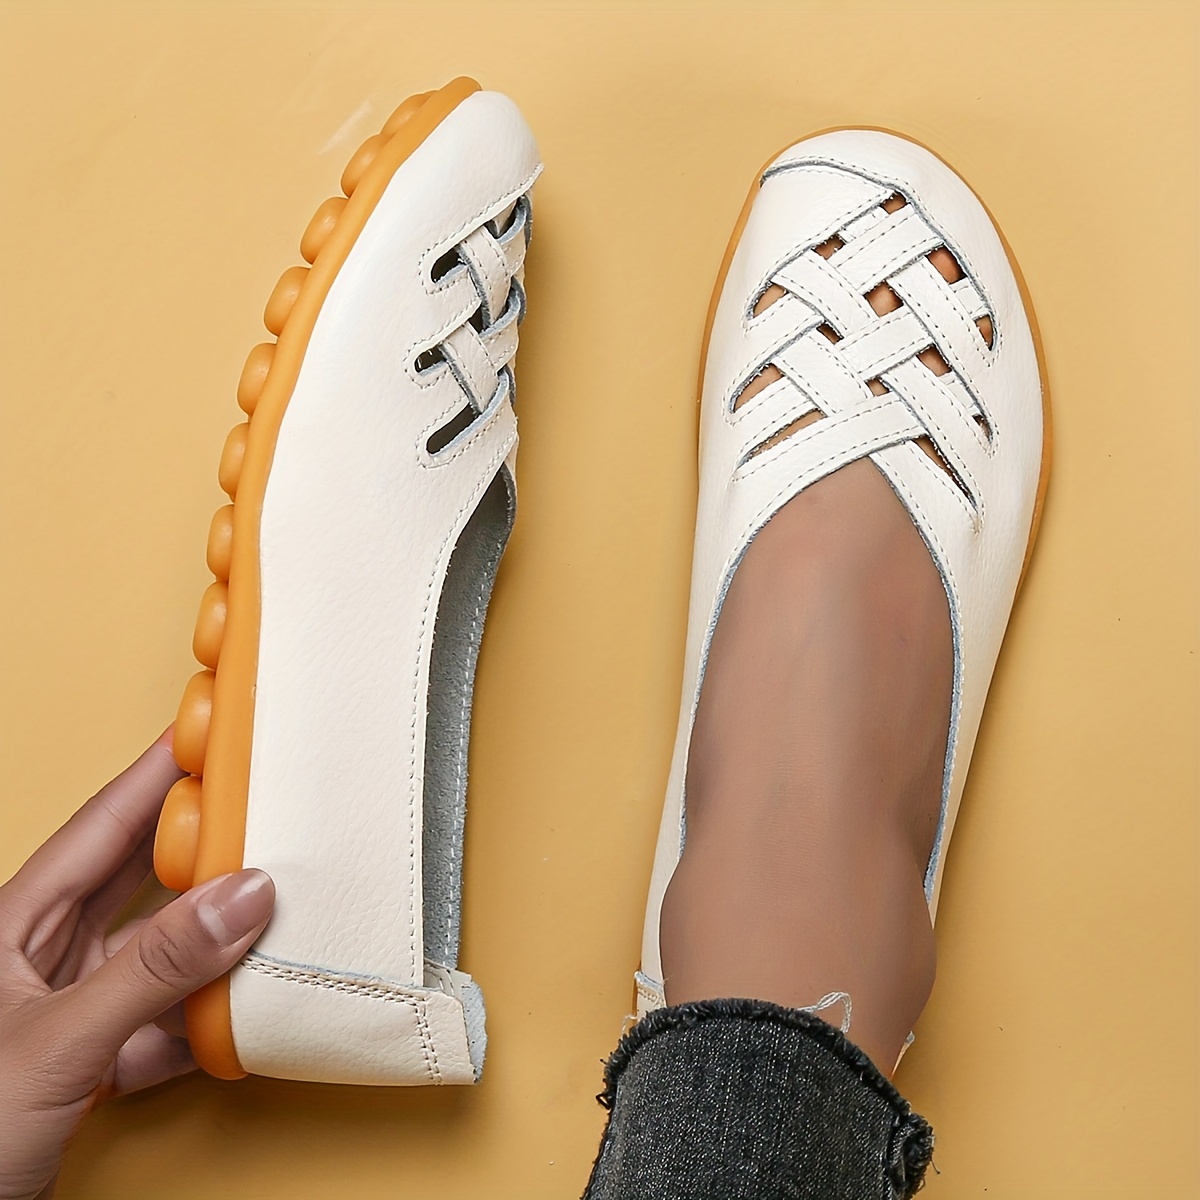 Slip On Half Shoes For Women Boat Shoes Ladies Korean Flat Shoes women's  fly woven breathable mesh shoes for Women Sneakers